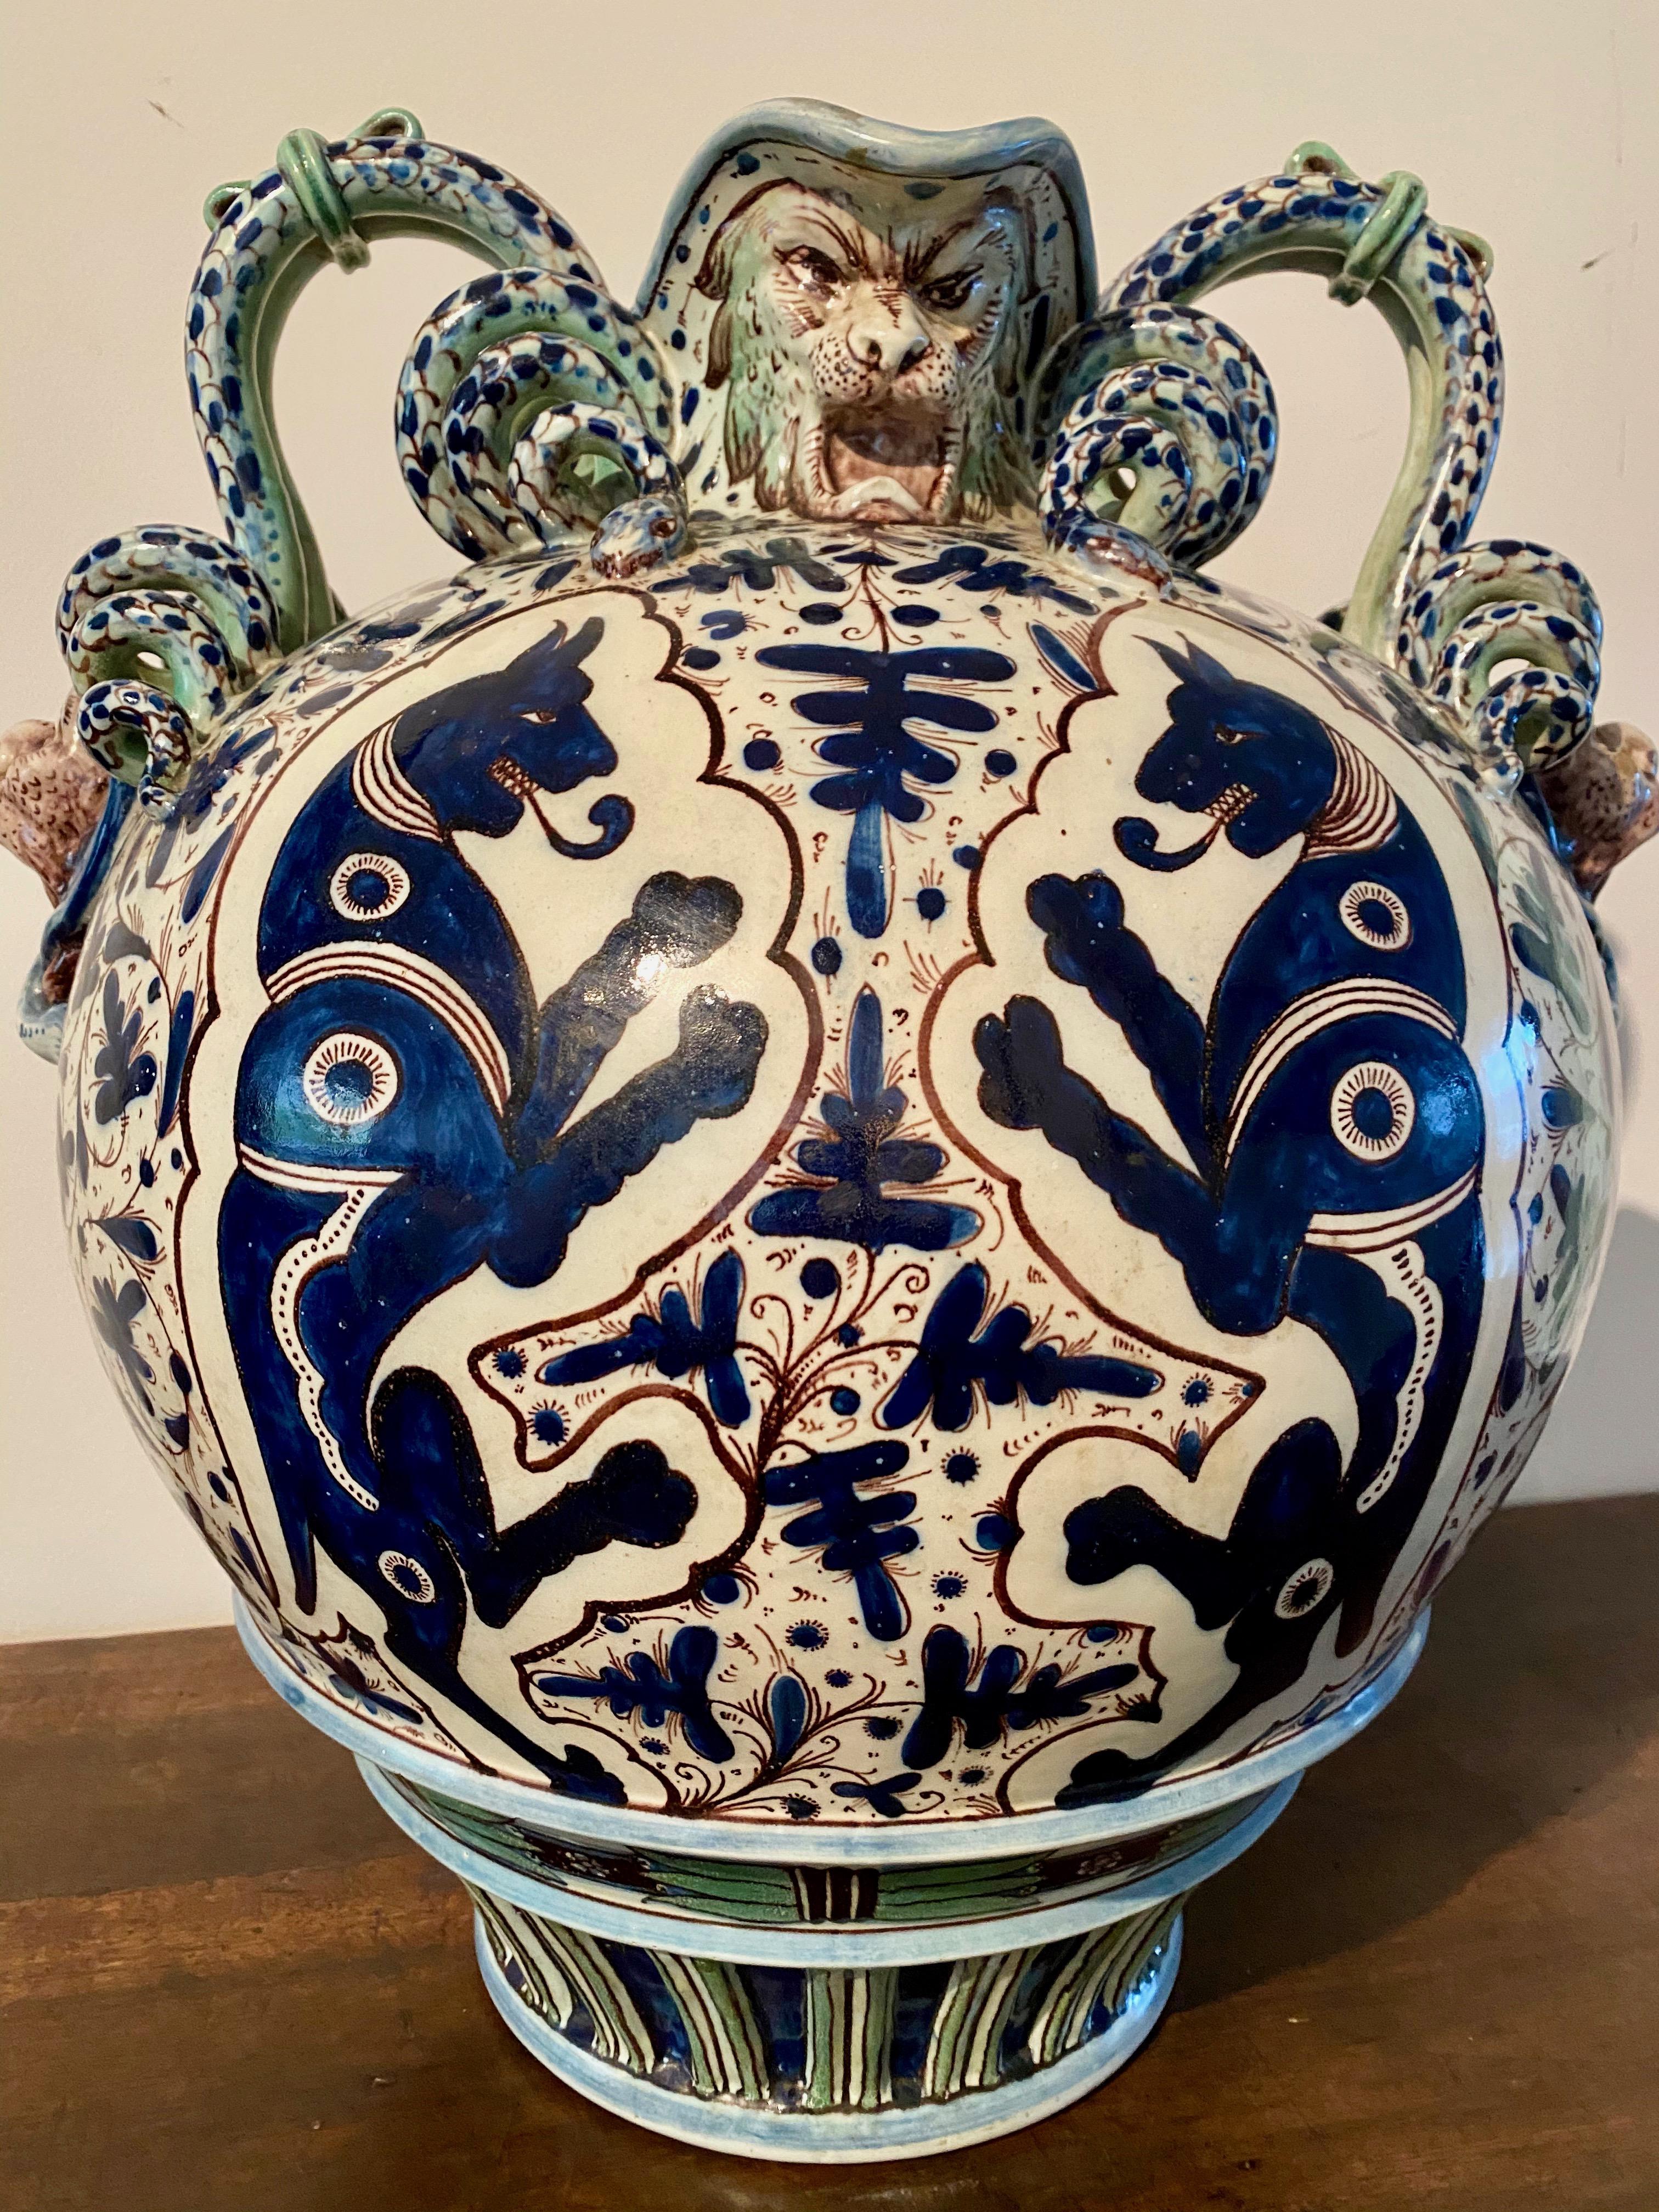 Cantagalli Armorial Vase, Ulisse Cantagalli (1839-1901)

During the 19th century Renaissance-Revival period the Cantagalli Maiolica and Ceramic Factory near Florence produced authentic copies of Renaissance Maiolica using traditional methods of